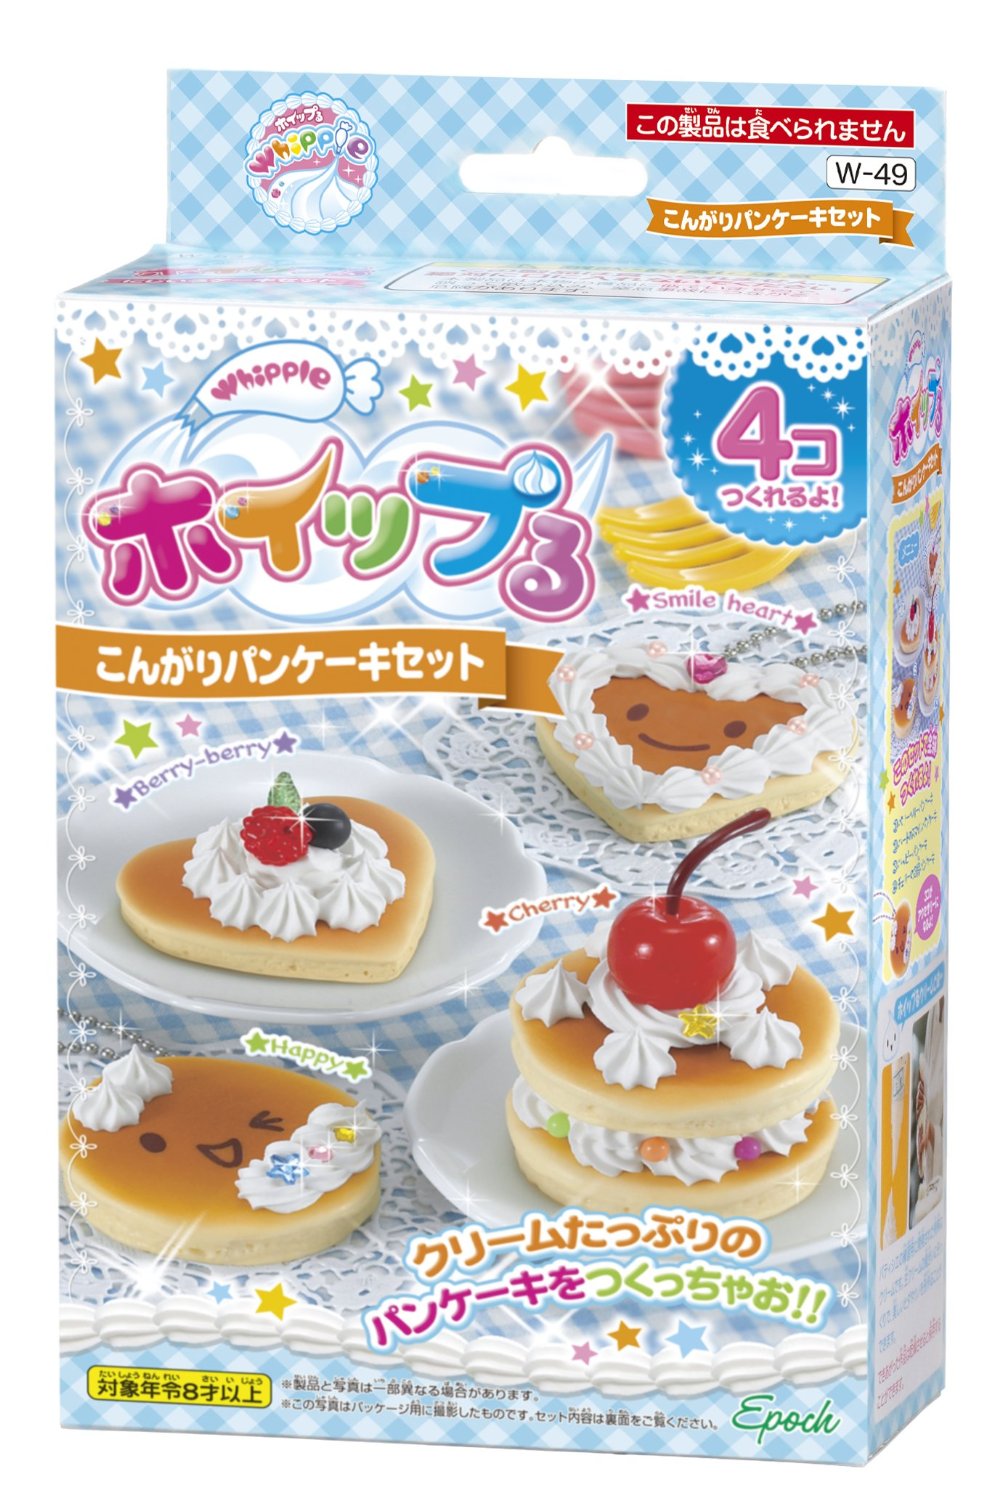 Decoden Sweets Kit! Whipple Patisserie Debut, A Whole Kit Full of